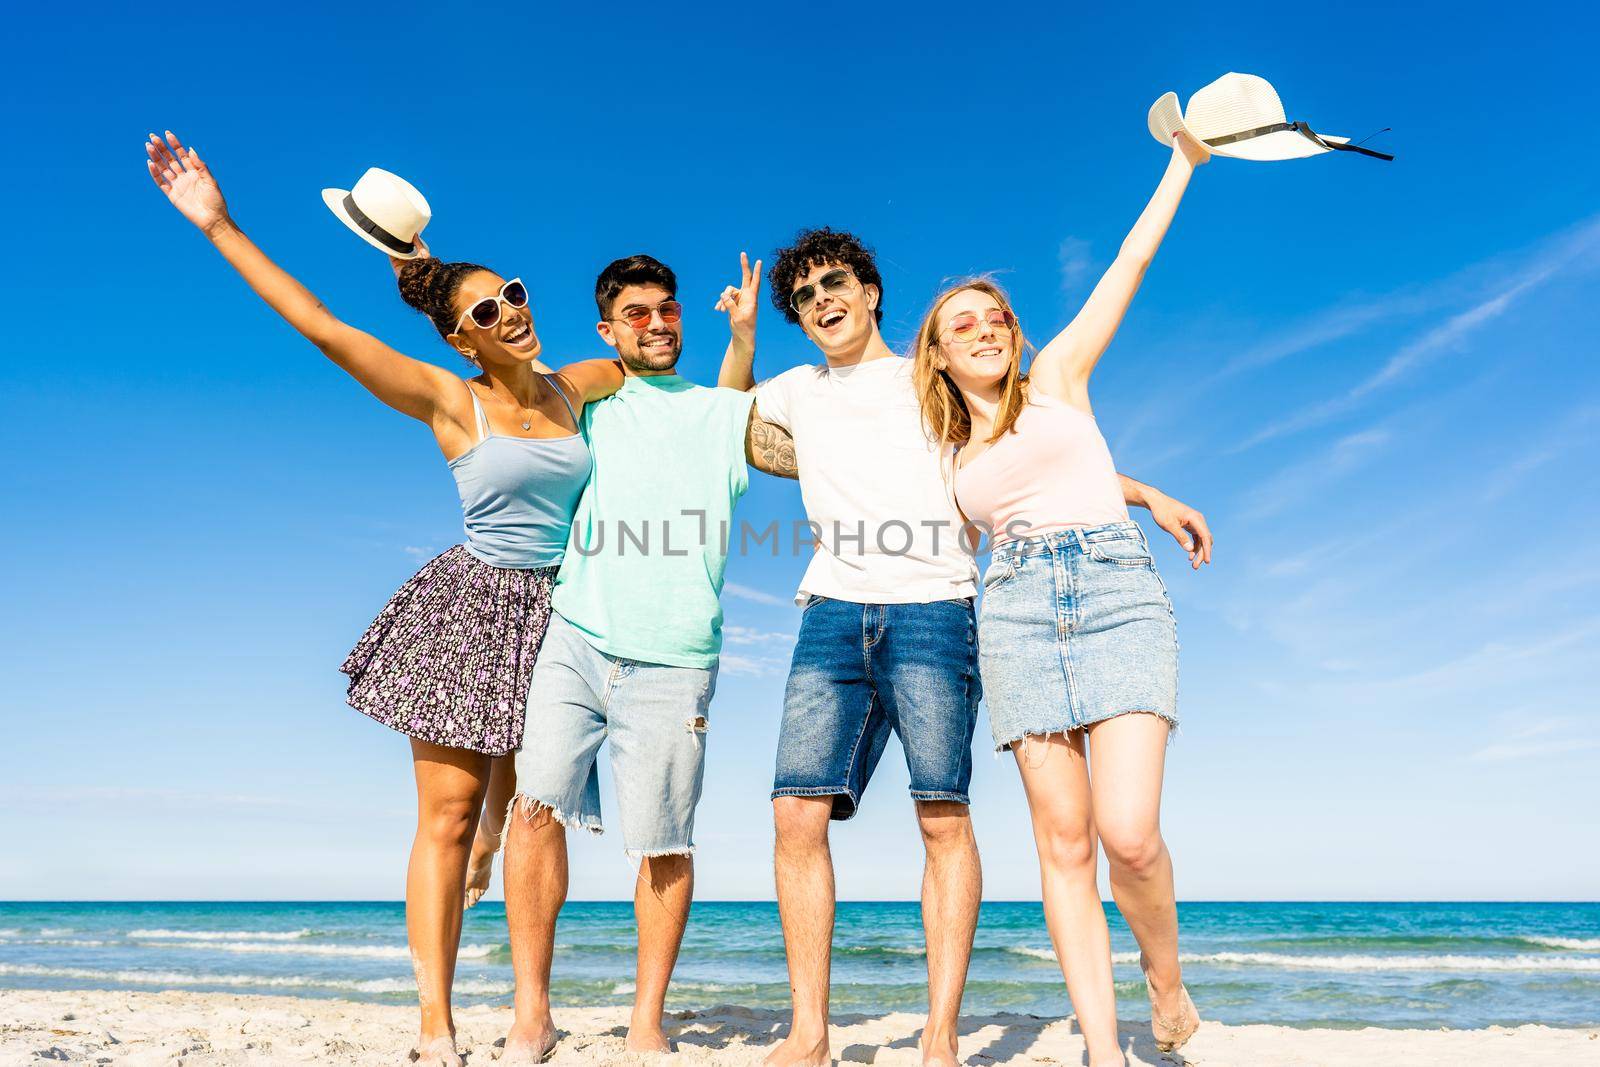 Group of multiracial young tourists posing for portrait photography in summer at tropical sea ocean resort with blue sky and crystal clear water. Happy millennial people on summer beach vacation by robbyfontanesi